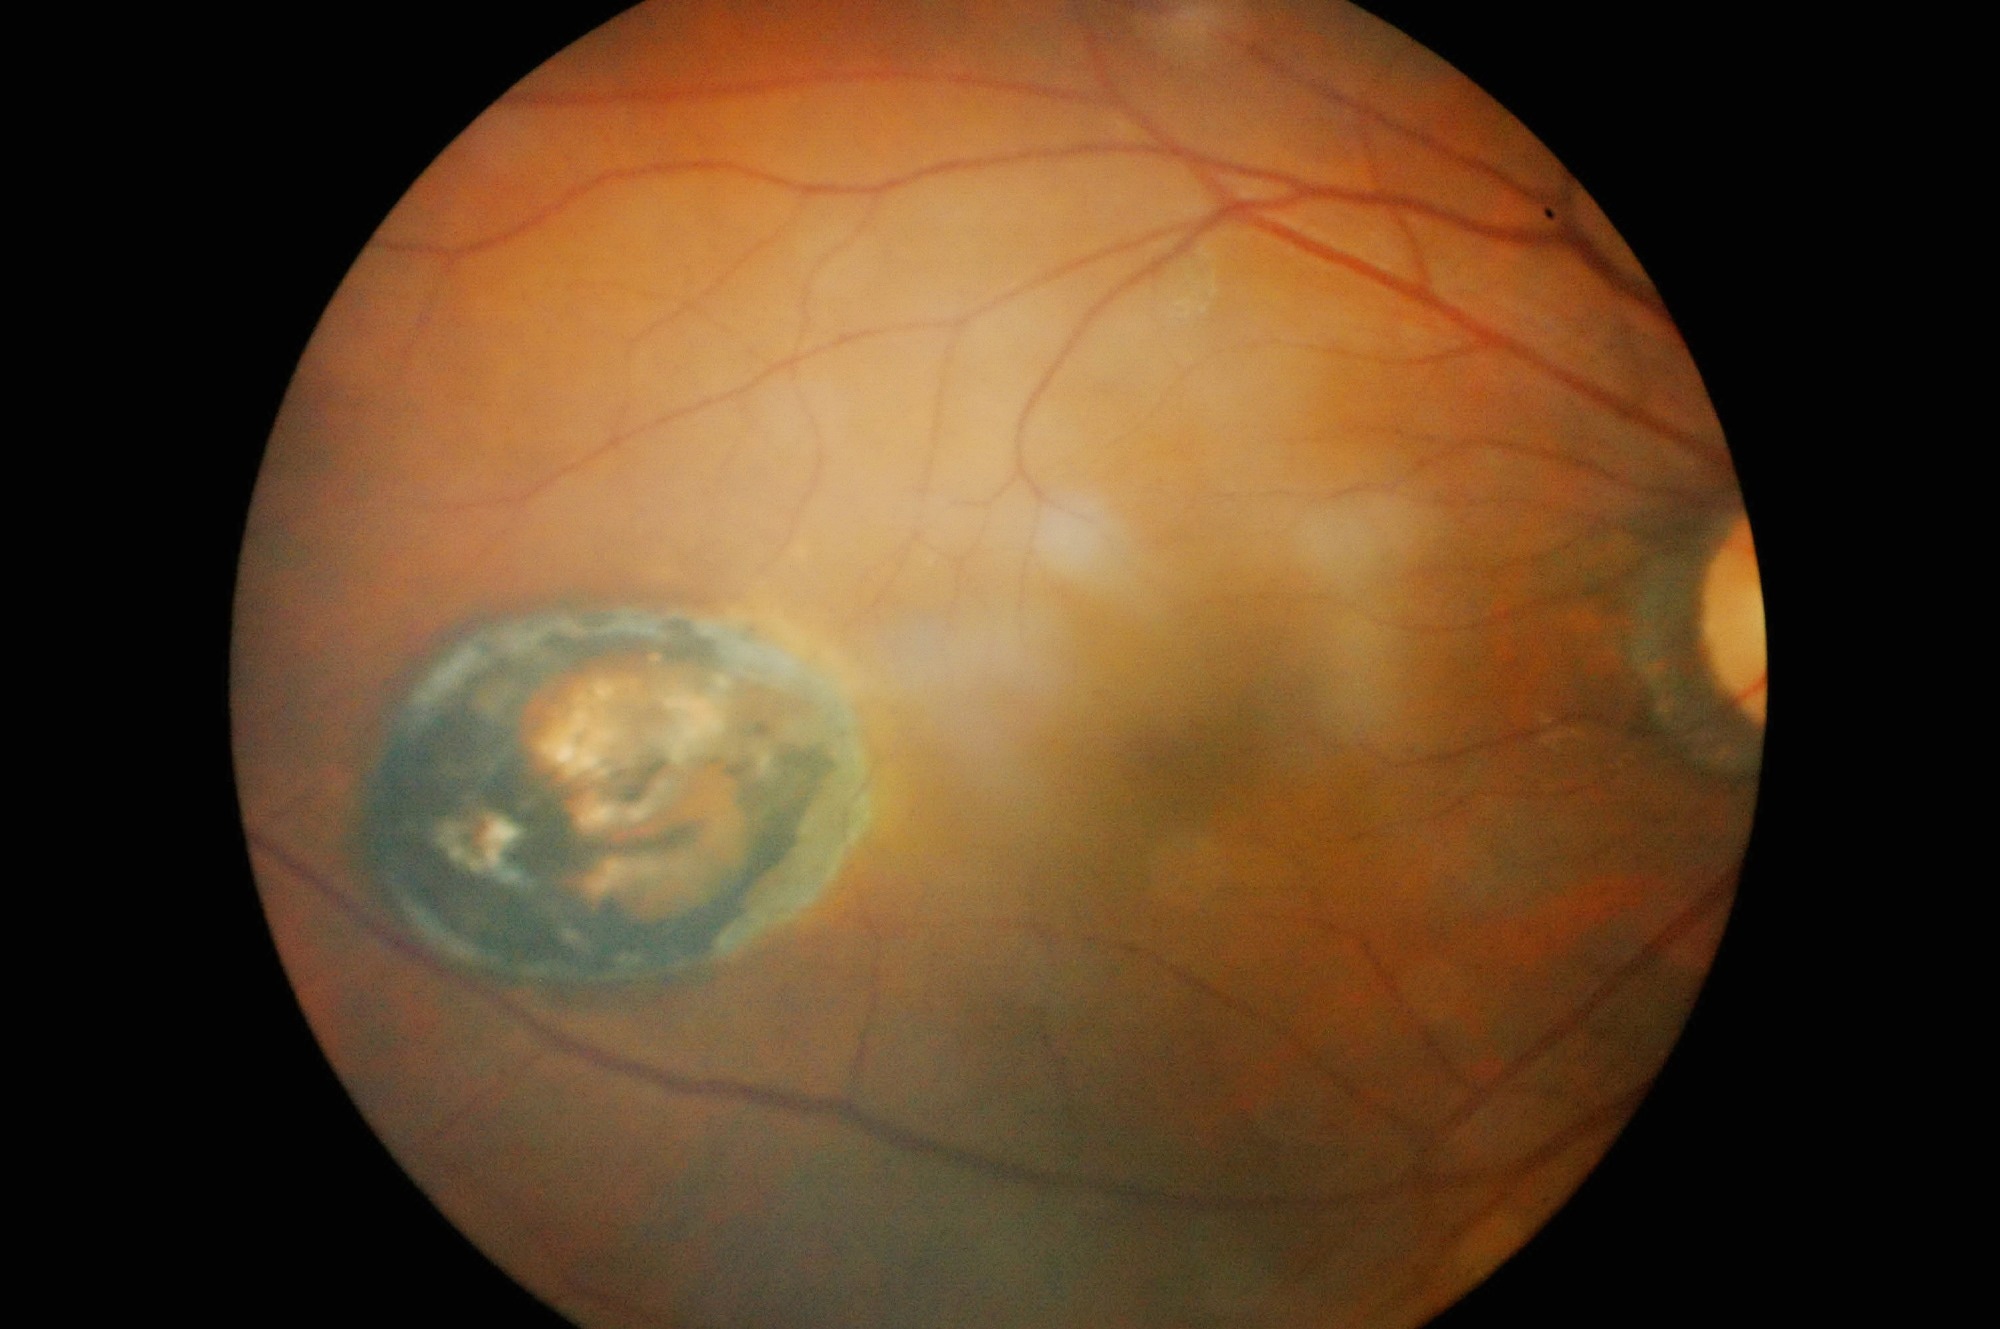 Study: Therapeutic Targeting of Cellular Senescence in Diabetic Macular Edema: Results of Preclinical and Phase 1 Trials.  Image credit: Anukool Manoton/Shutterstock